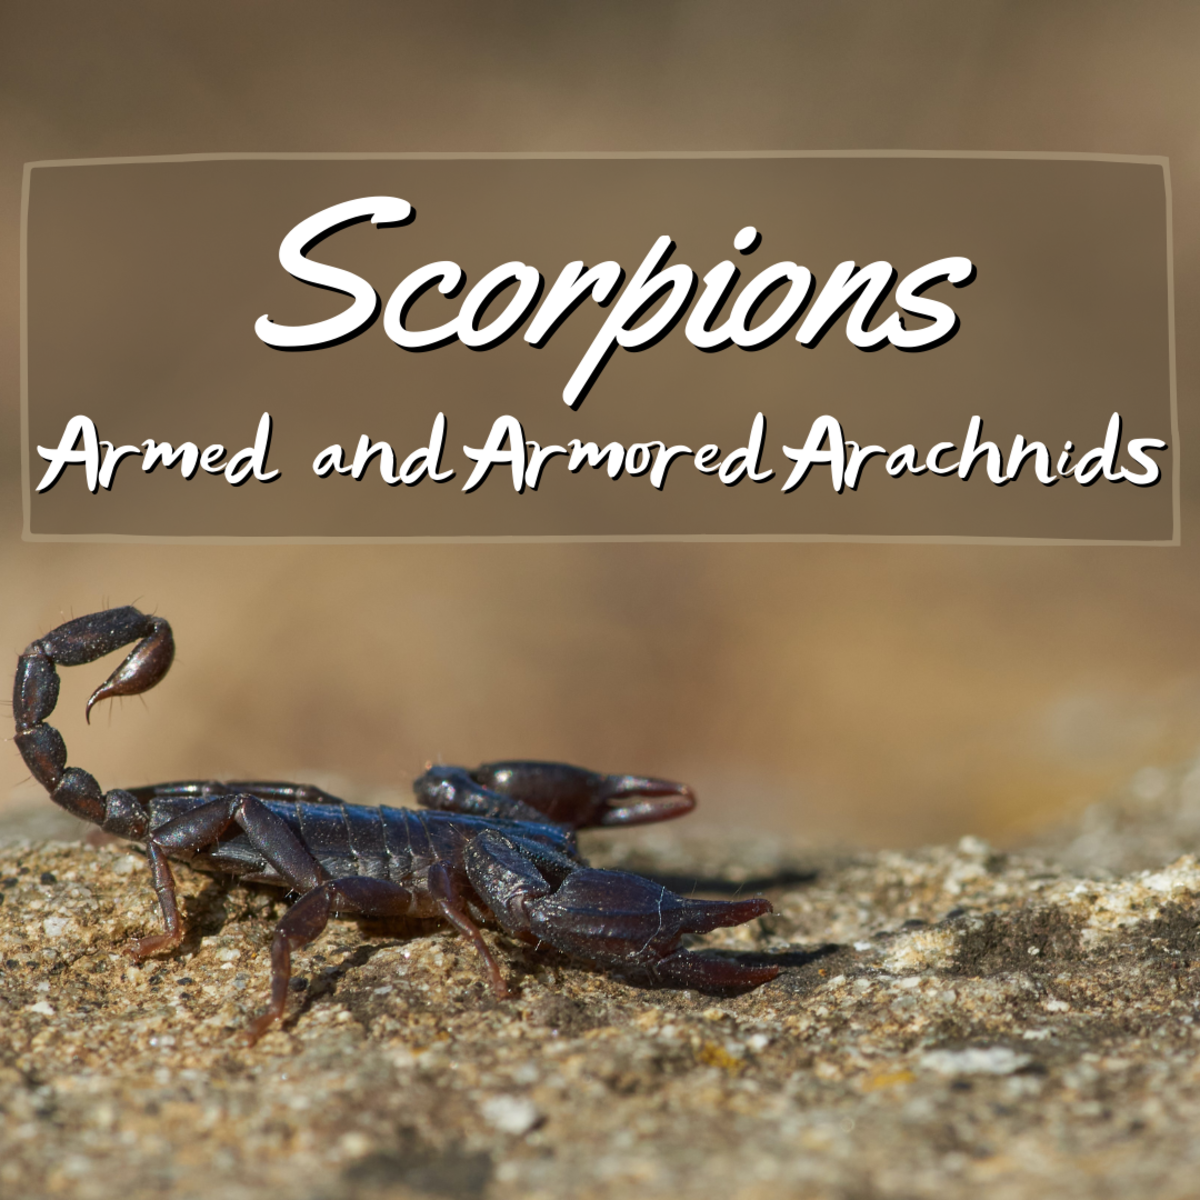 Scorpions: Facts and Info